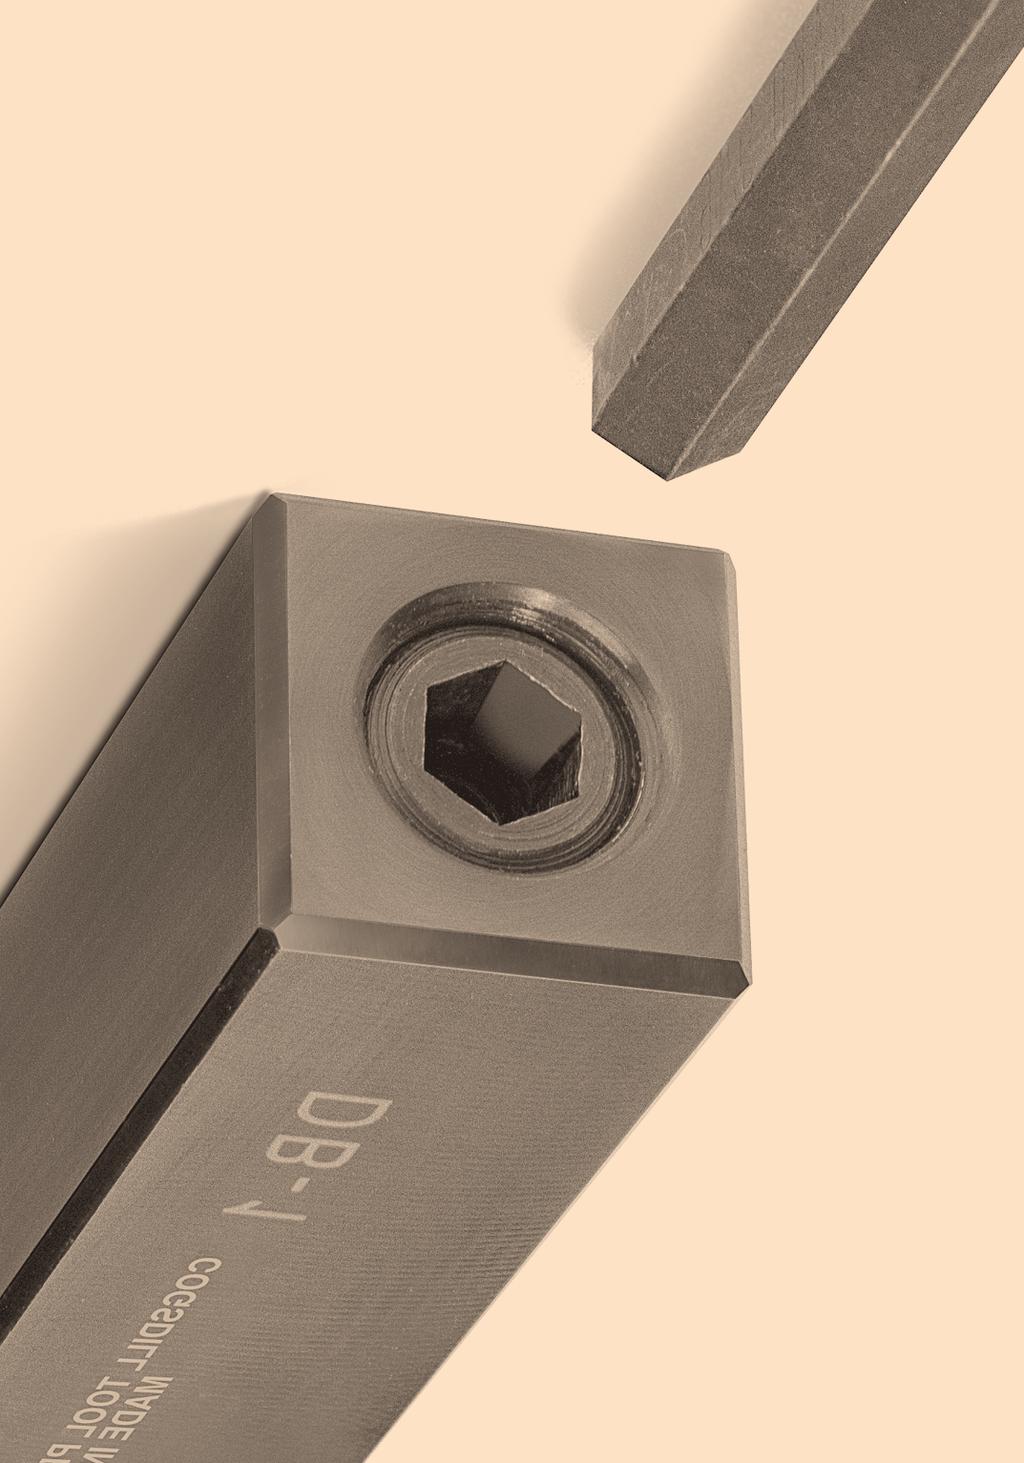 The tool is then fed into the workpiece an additional.002 or.003 inch (.05 or.08mm) to allow the diamond insert to become disengaged from the stop in the holder.